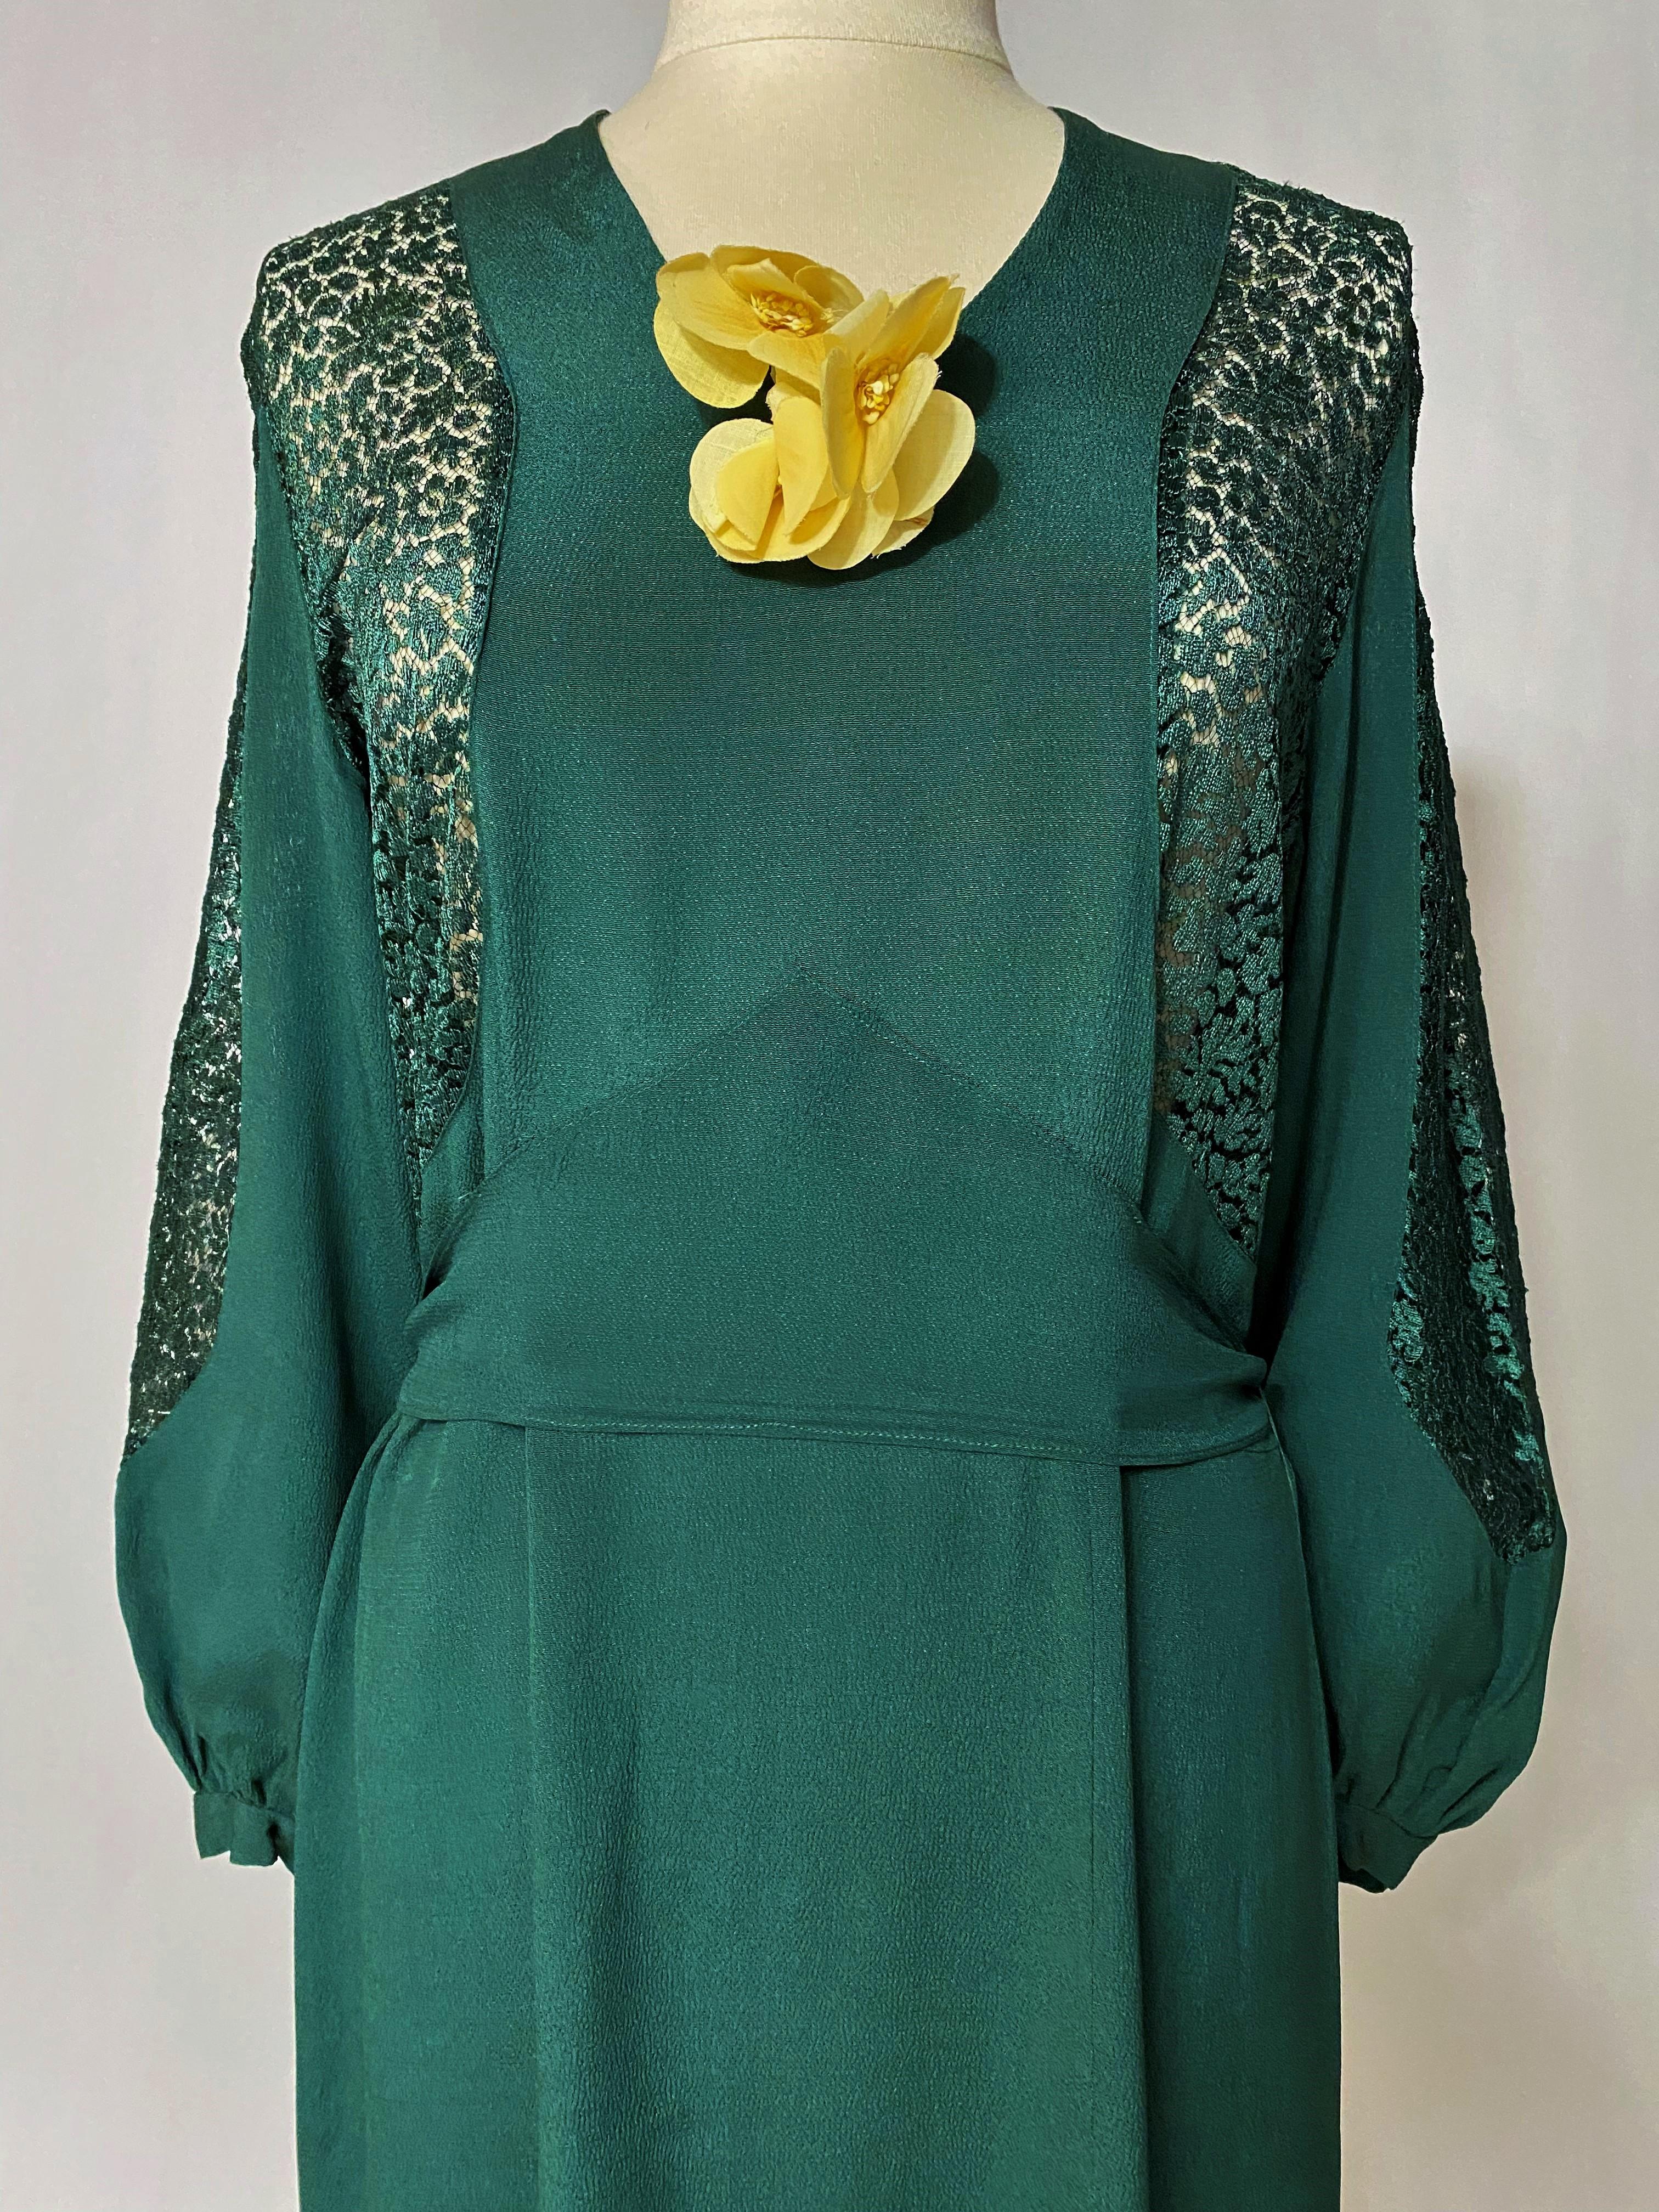 Green An Emerald green crepe and lace evening dress- France Circa 1940 For Sale